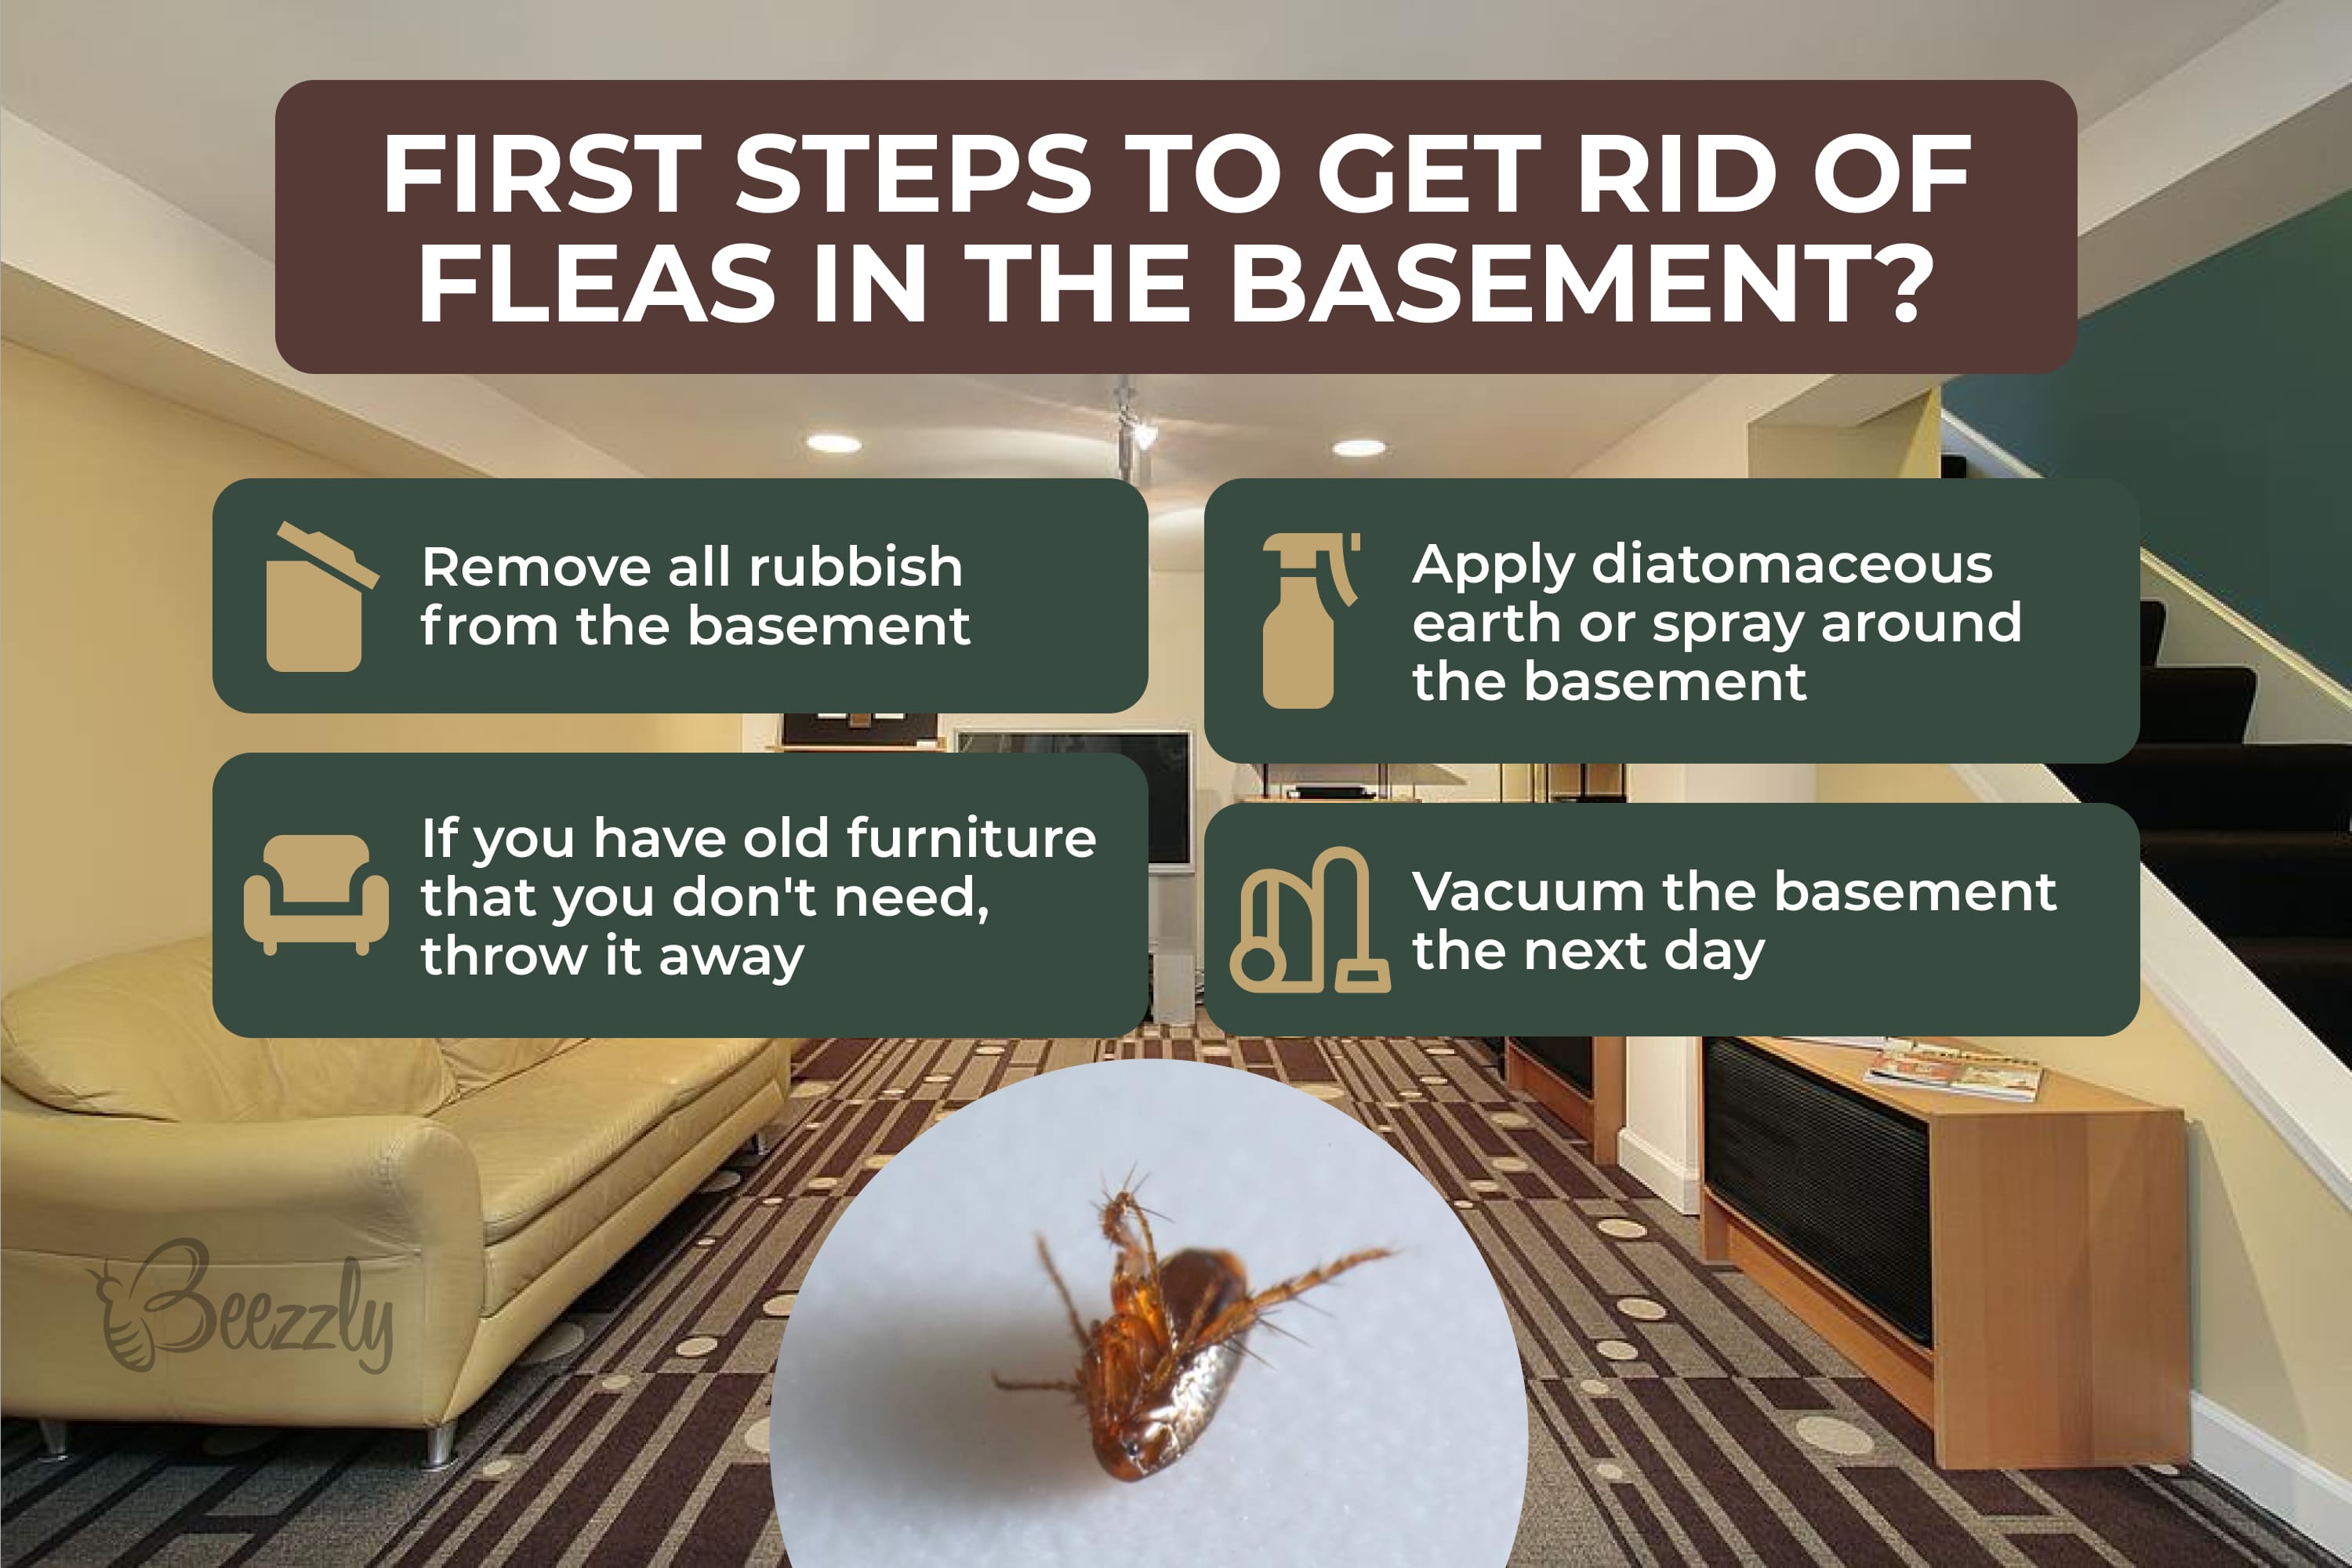 First steps to get rid of fleas in the basement